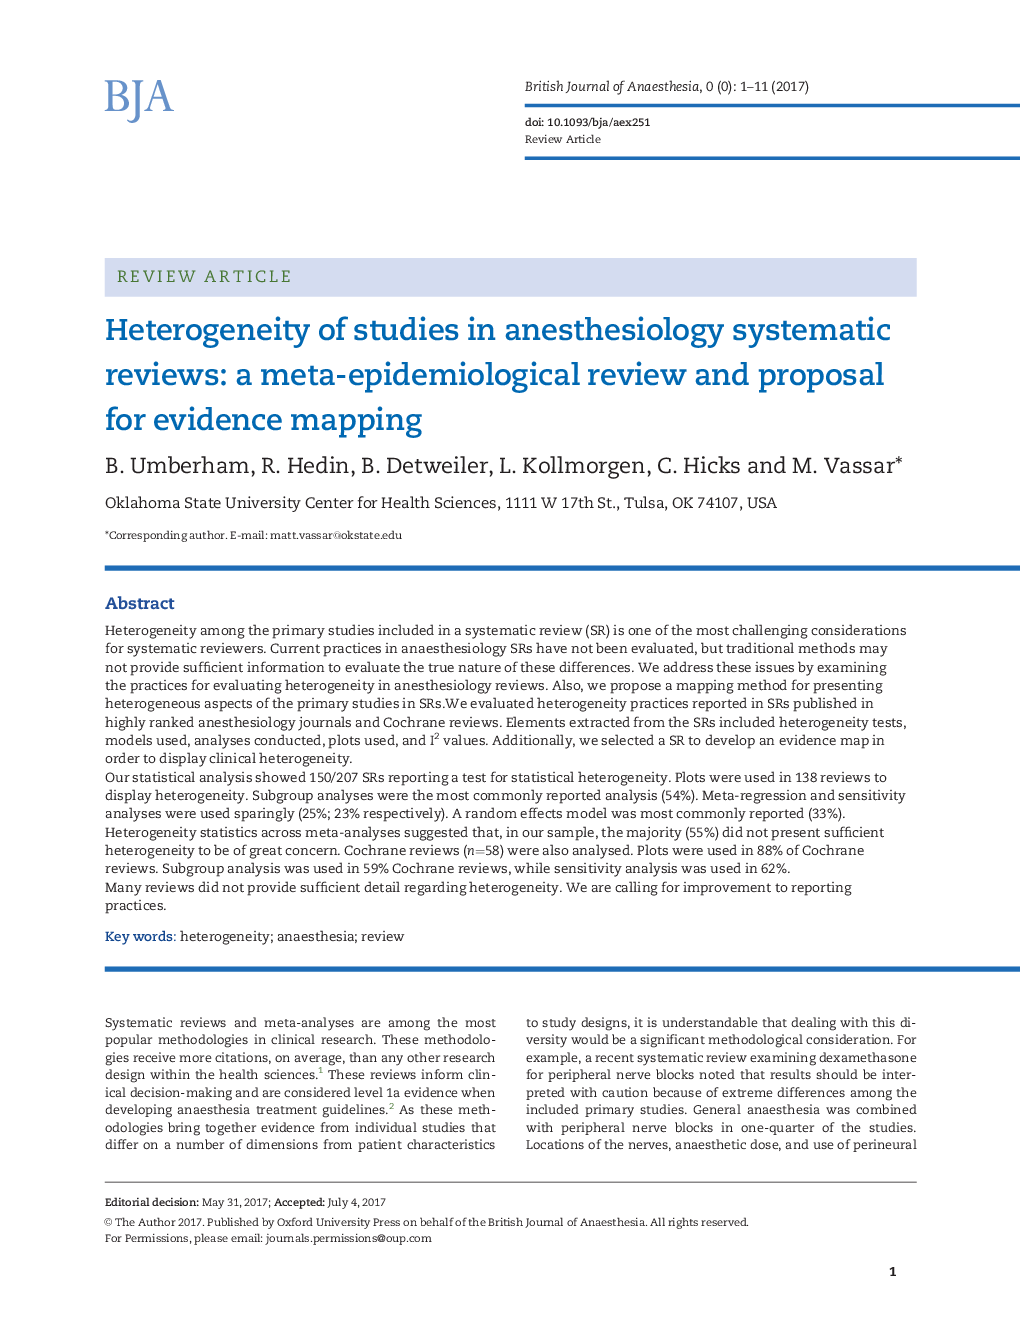 Heterogeneity of studies in anesthesiology systematic reviews: a meta-epidemiological review and proposal for evidence mapping